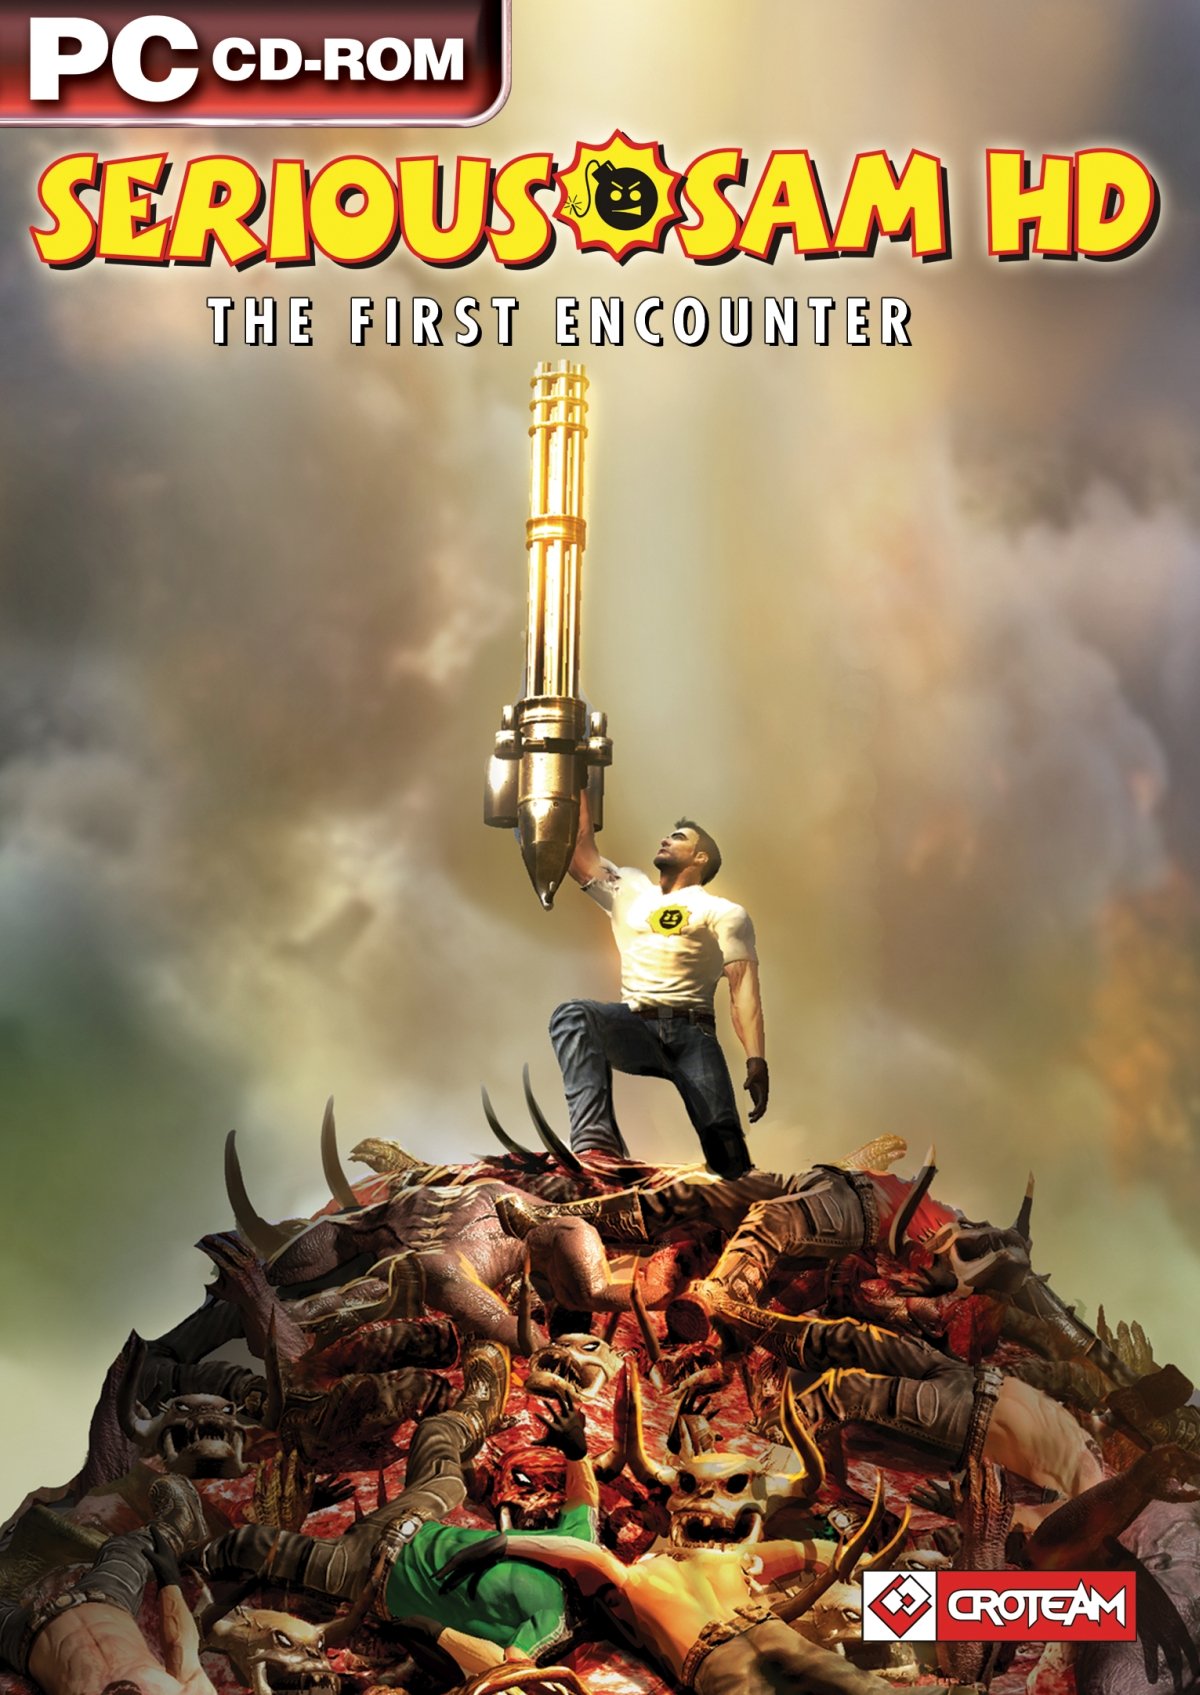 Image of Serious Sam HD: The First Encounter